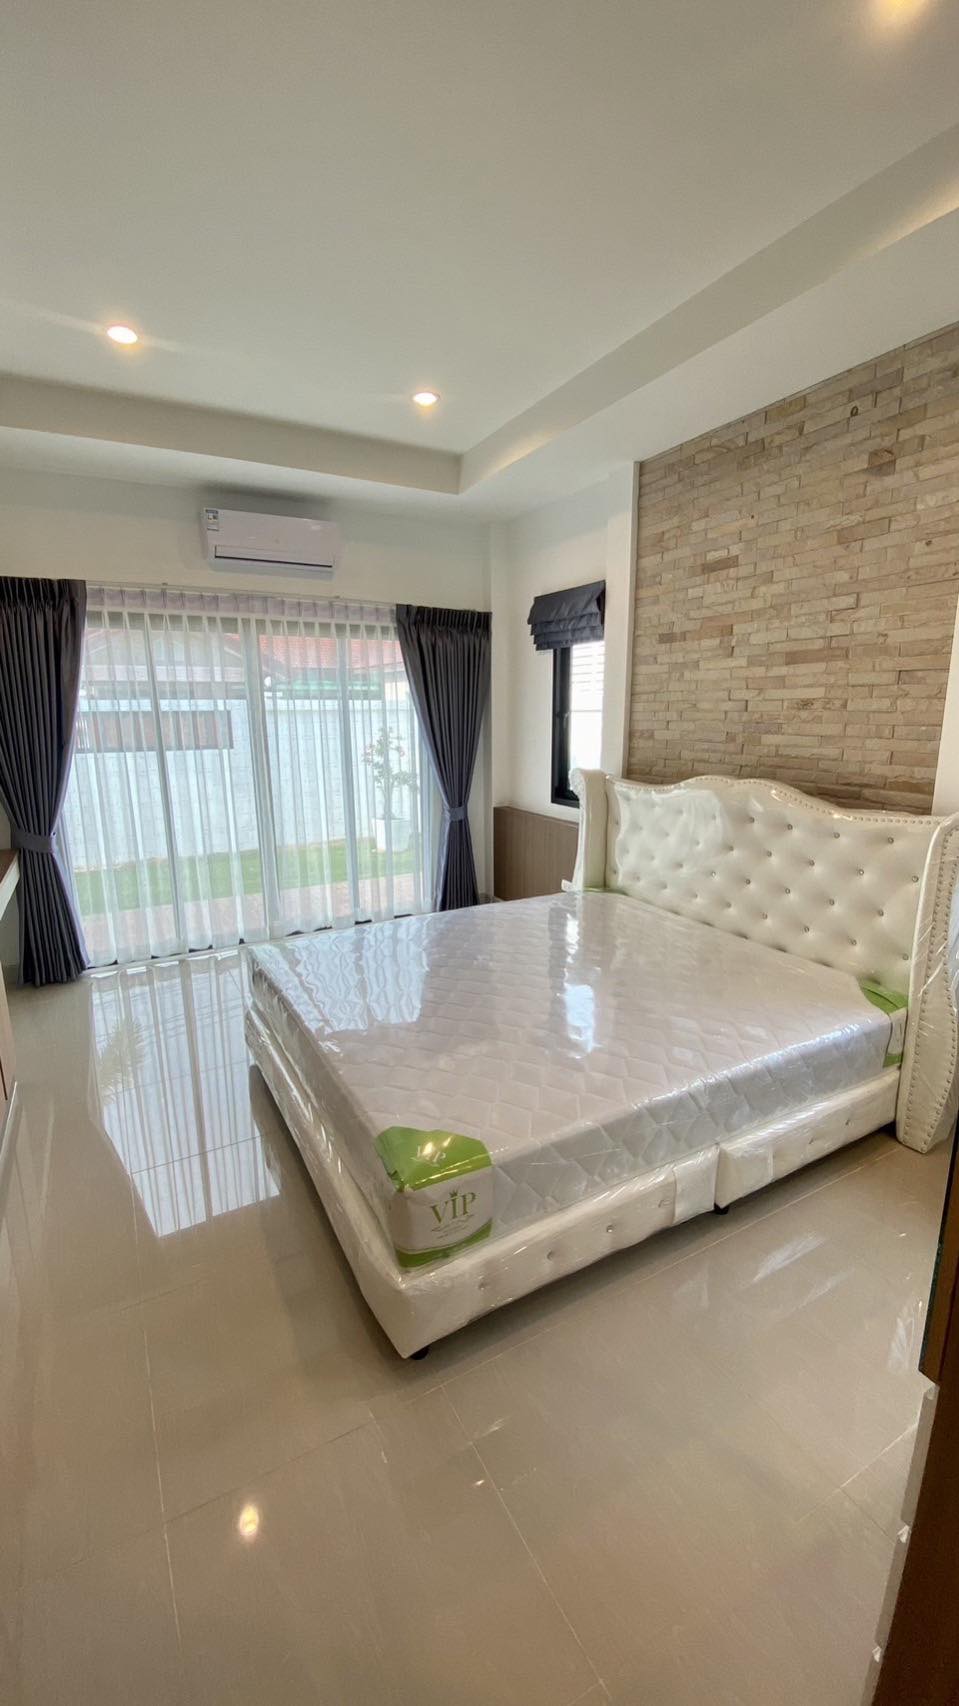 The Bliss 2 Village. 3 bedrooms Detached Pool House in Huai Yai area